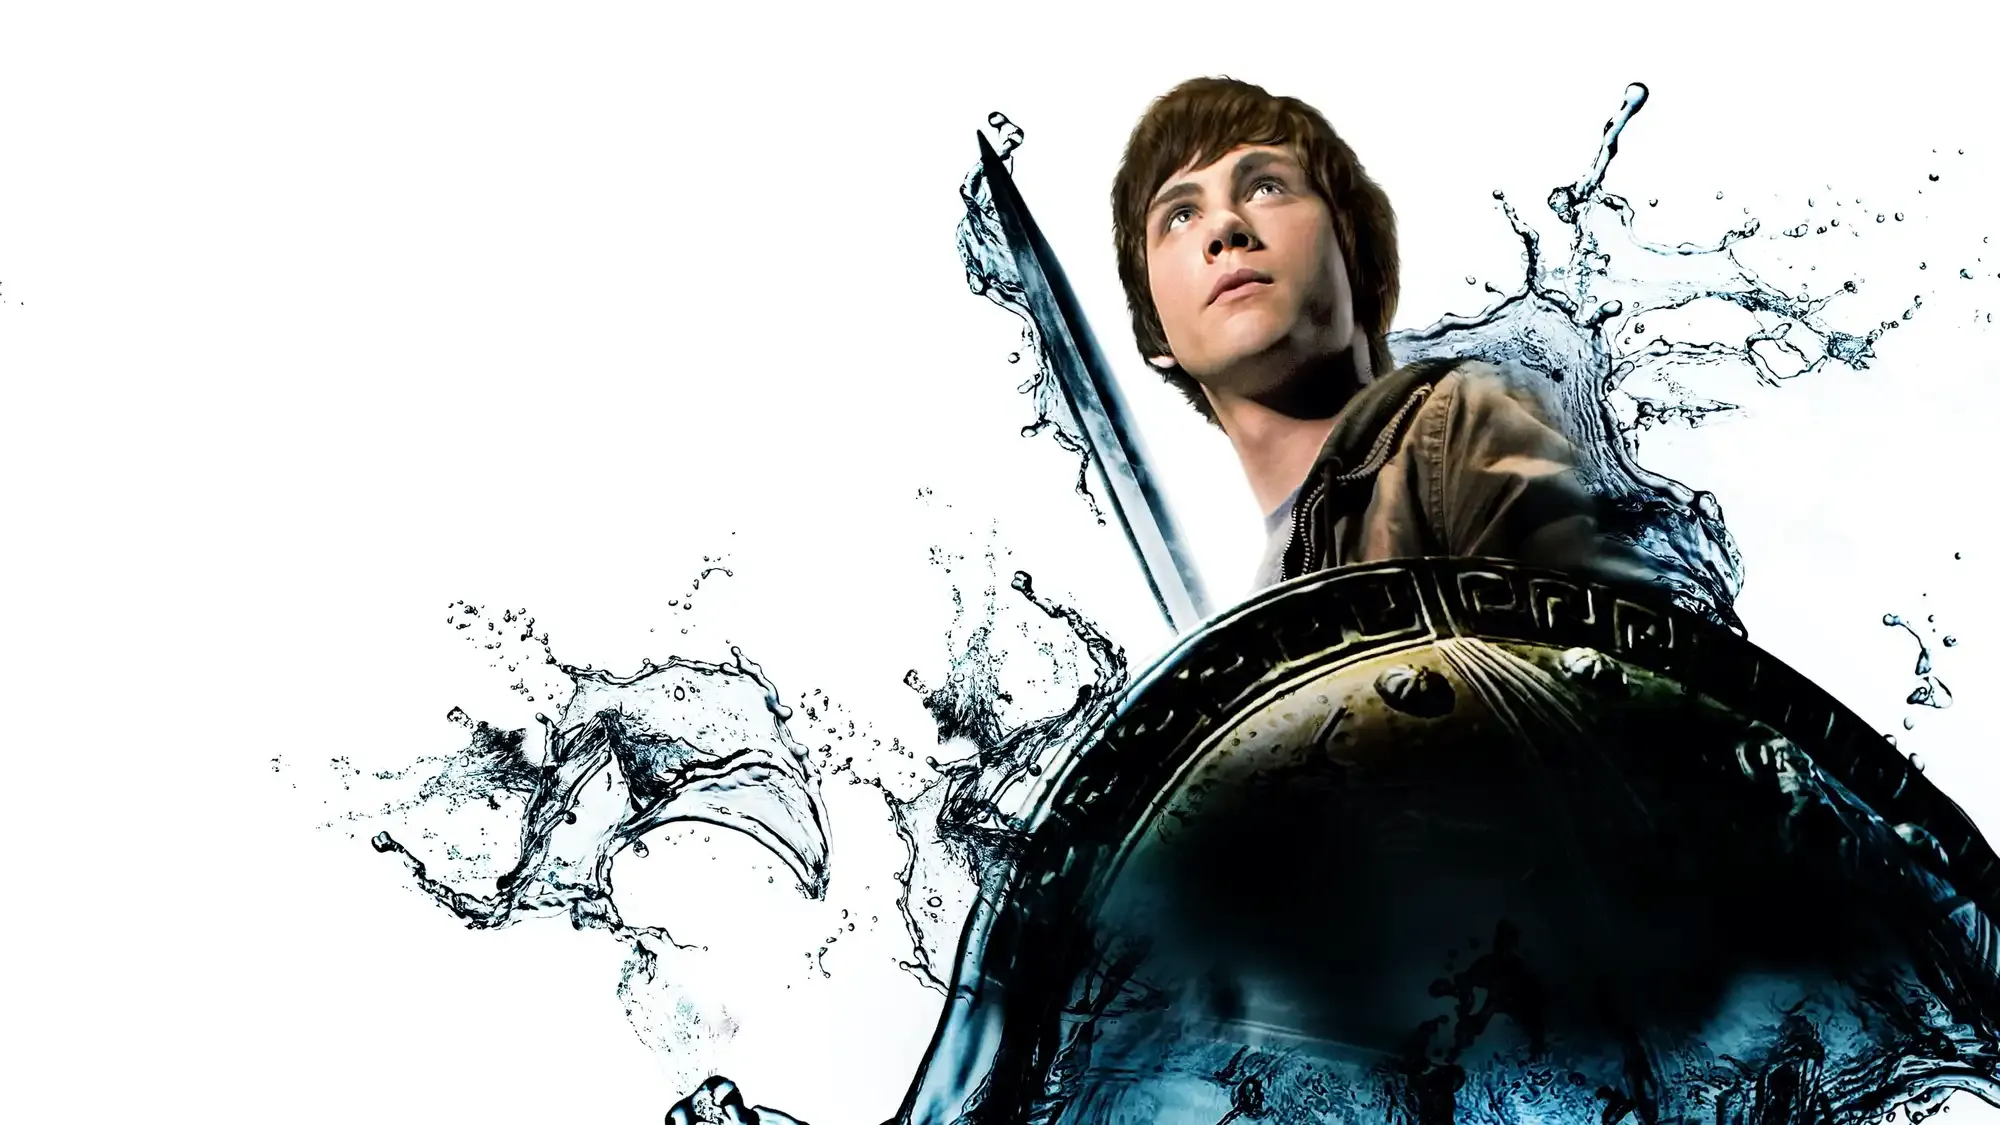 Percy Jackson & the Olympians: The Lightning Thief movie review